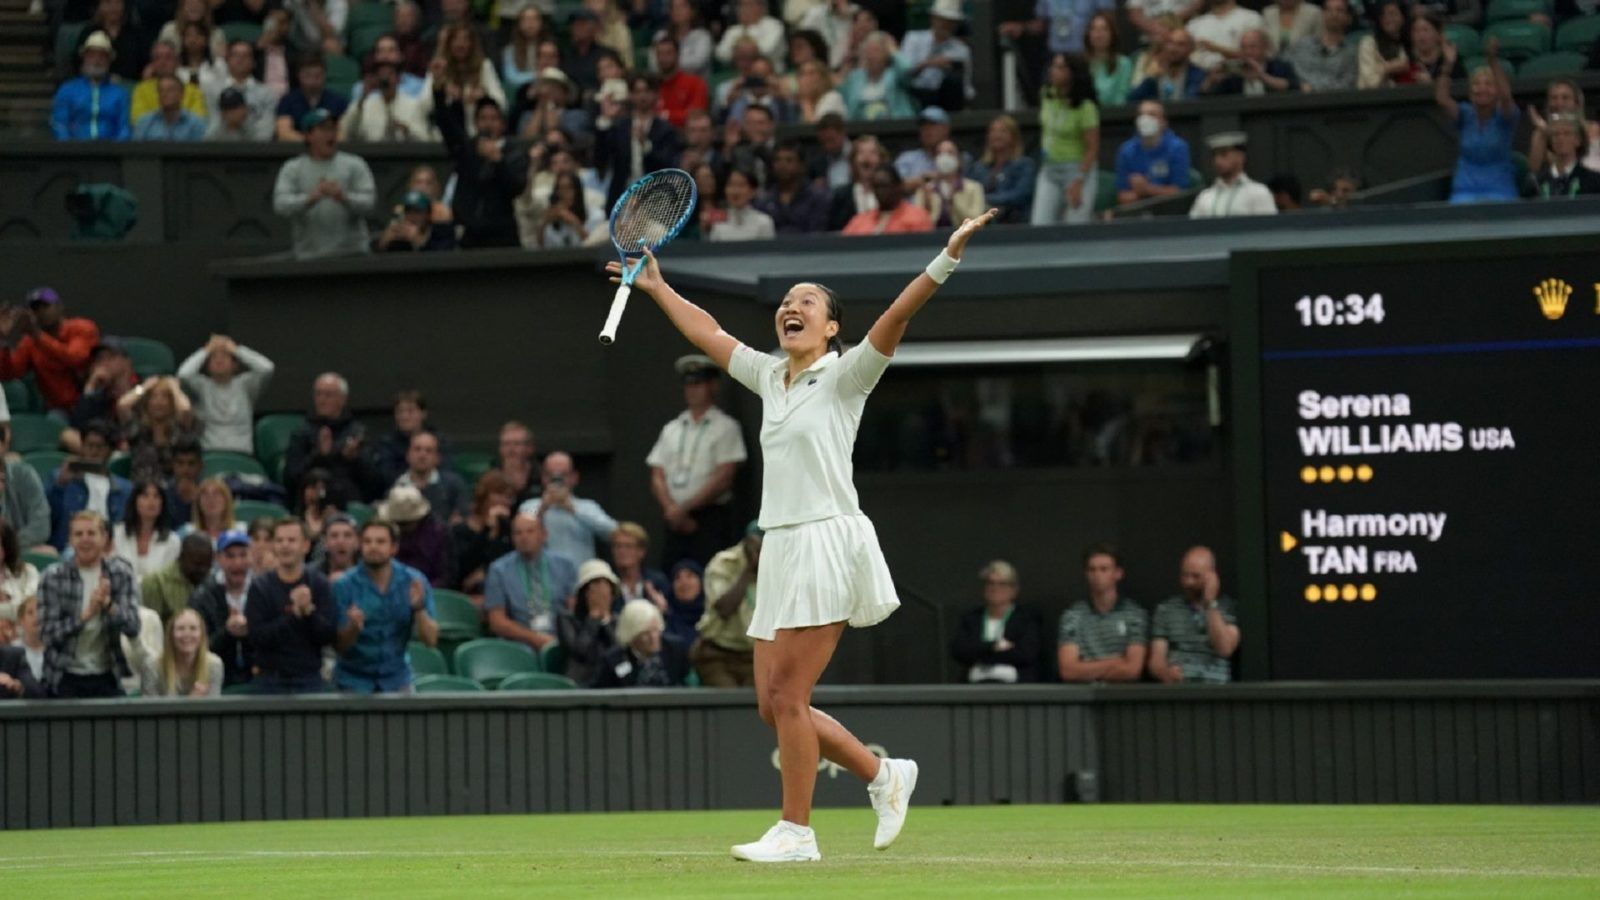 Who is Harmony Tan, the French tennis player who defeated Serena Williams at Wimbledon 2022?